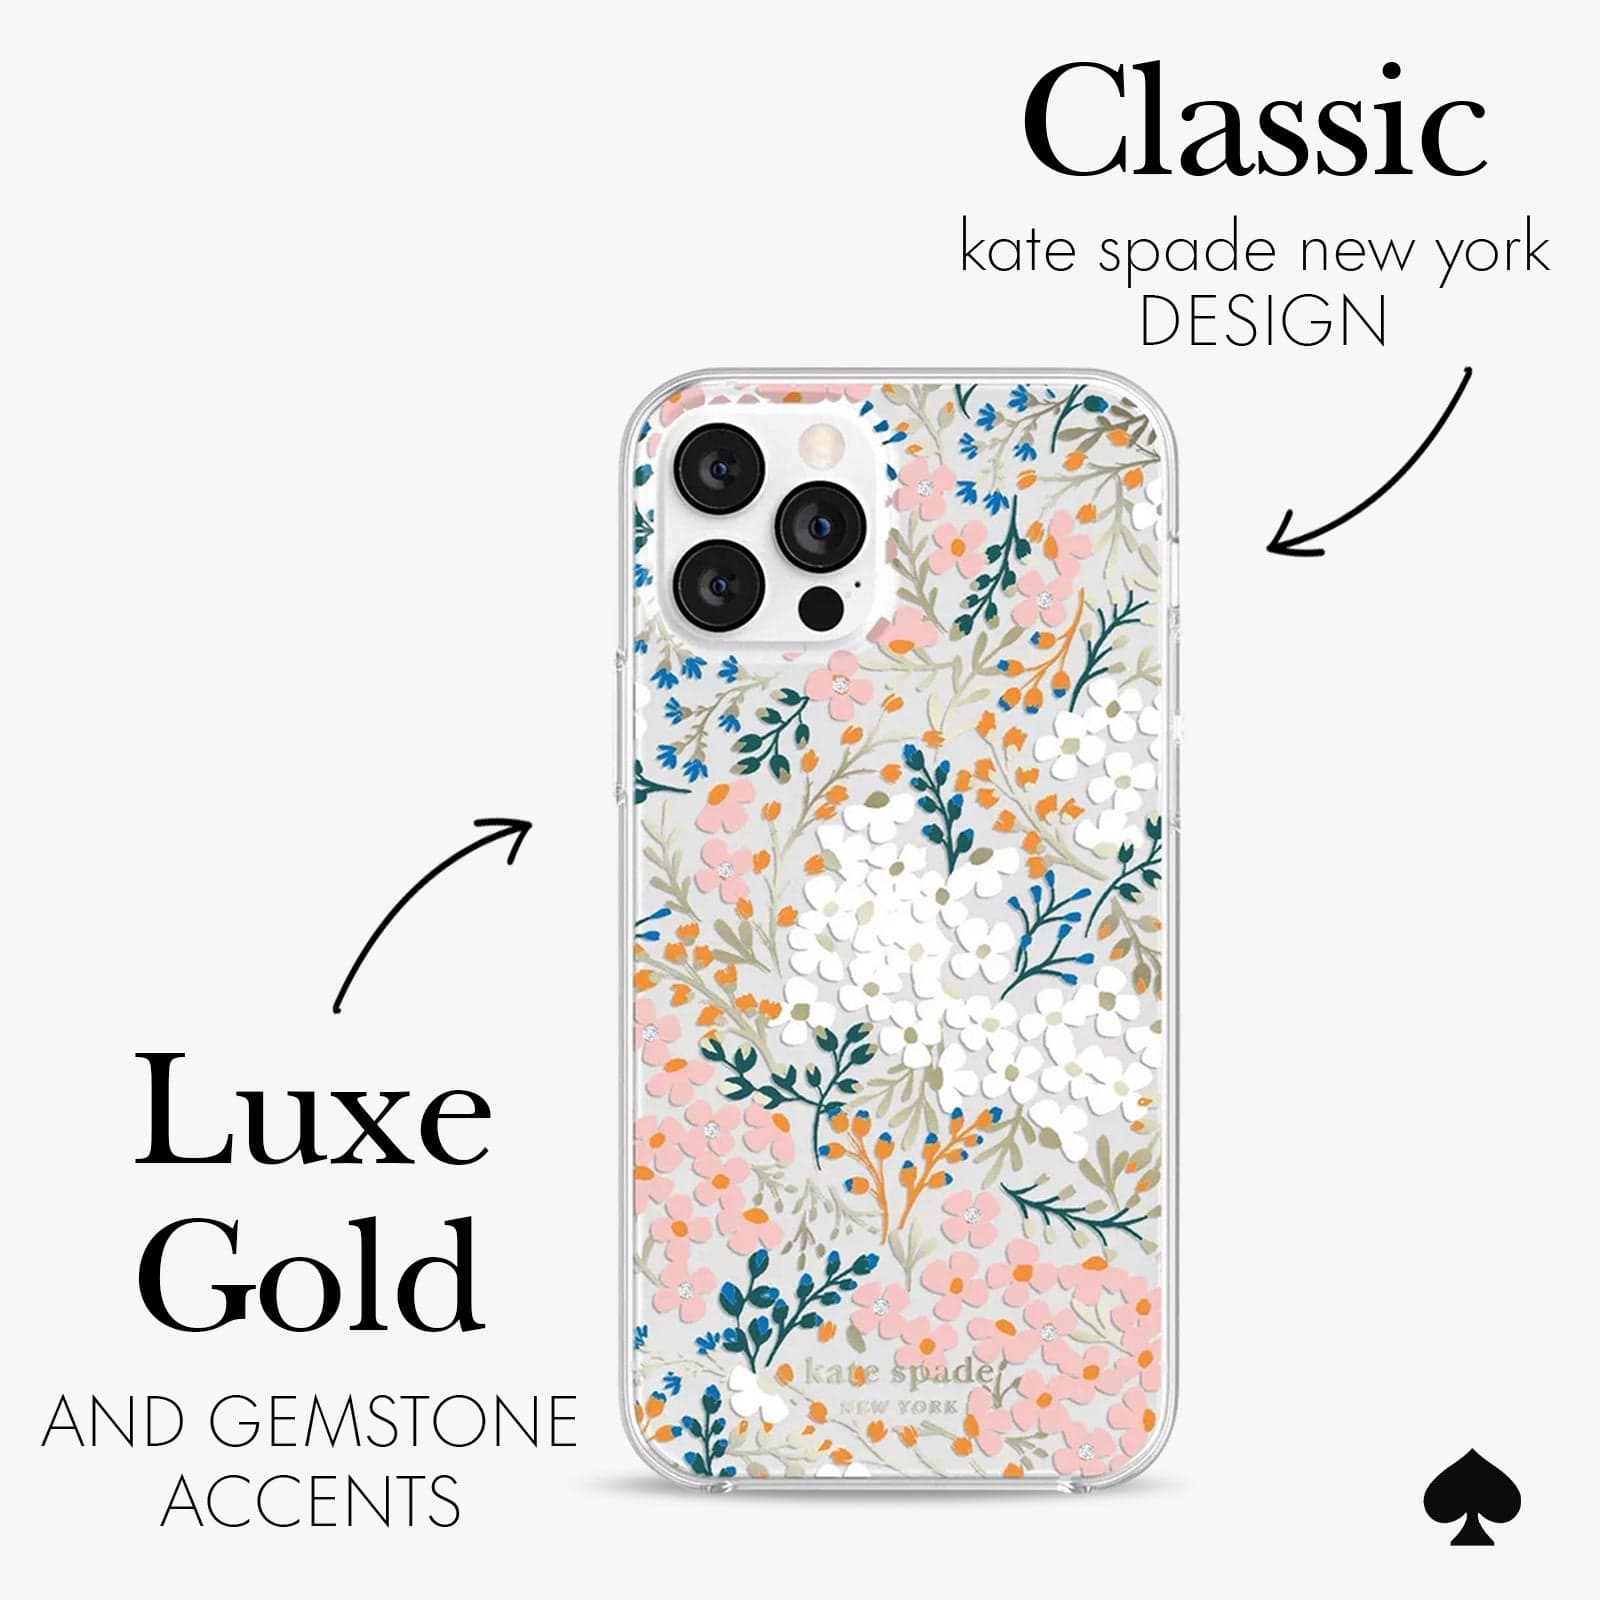 SIGNATURE KATE SPADE NEW YORK DESIGN. LUXEGOLD AND GEMSTONE ACCENTS